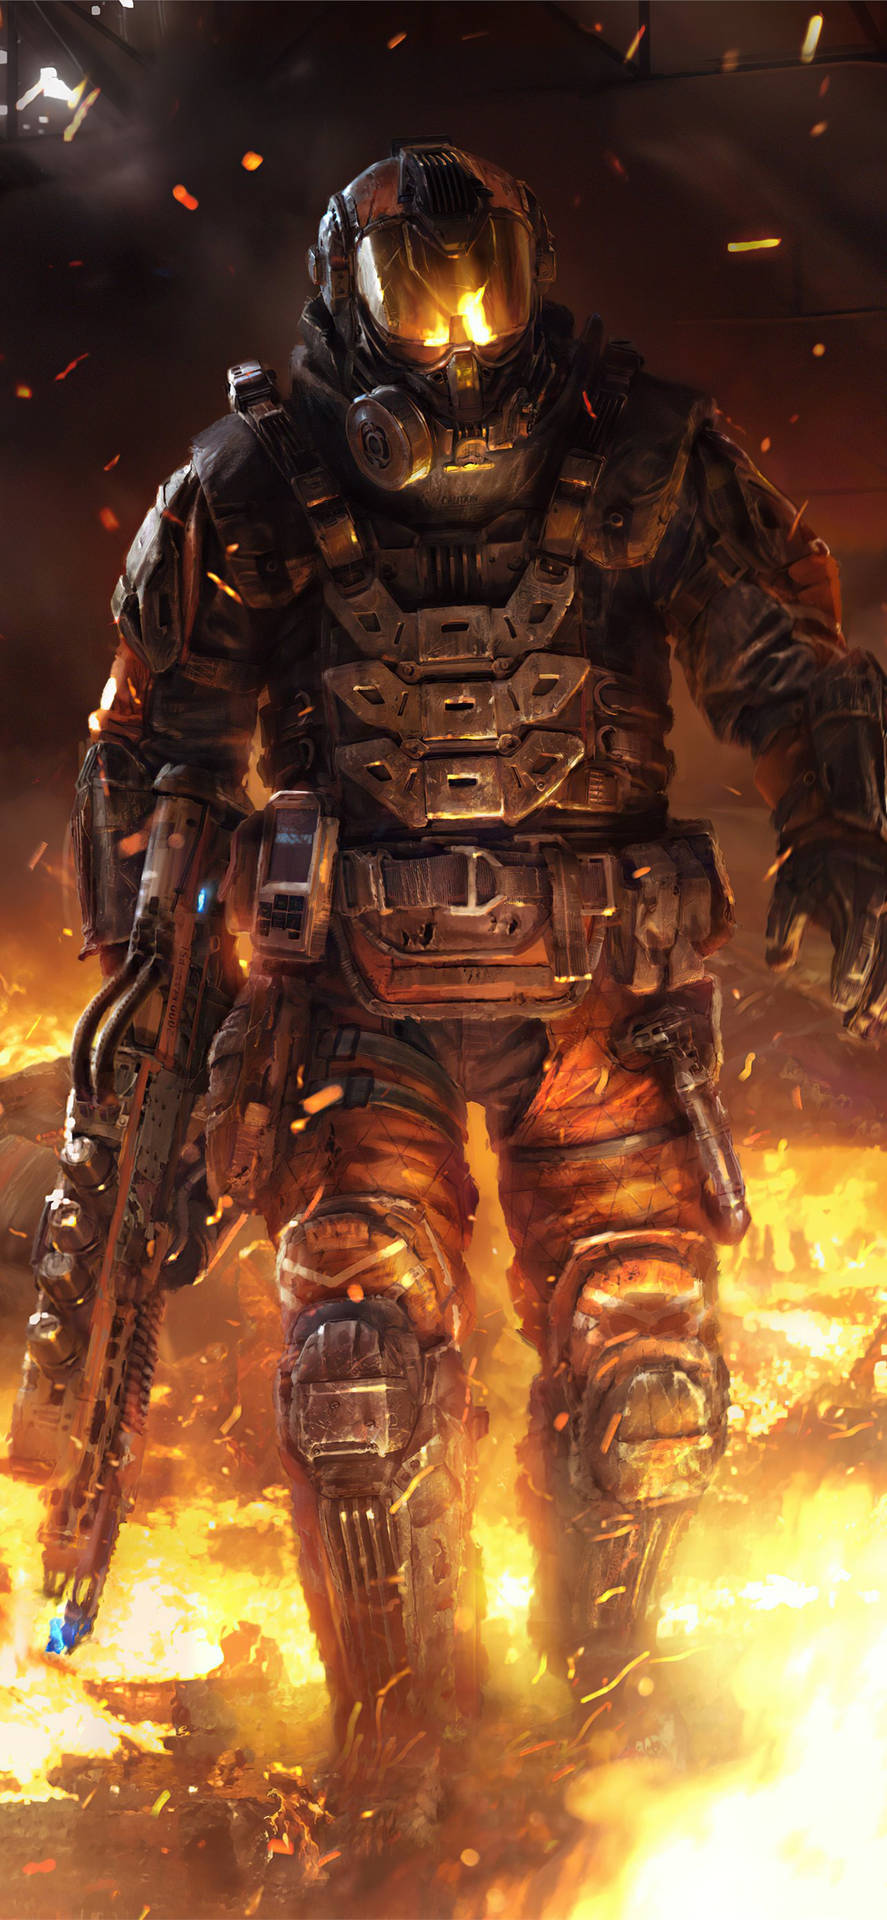 Strike hard in sophisticated shootouts with Call of Duty: Black Ops 3! Wallpaper